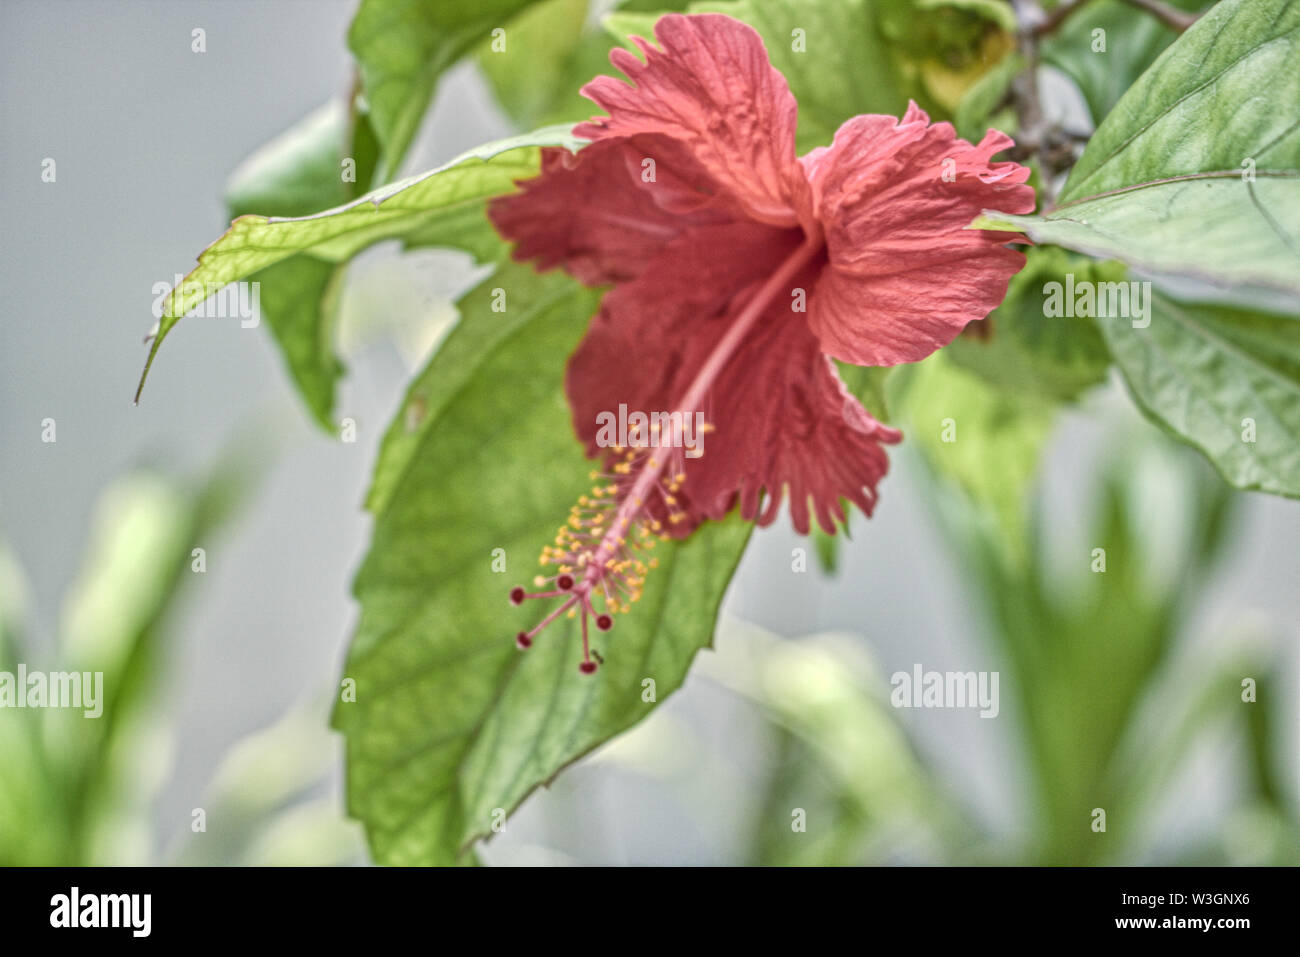 This unique photo shows the beautiful red flower of a big hibiscus shrub. This picture was taken in the Maldives Stock Photo